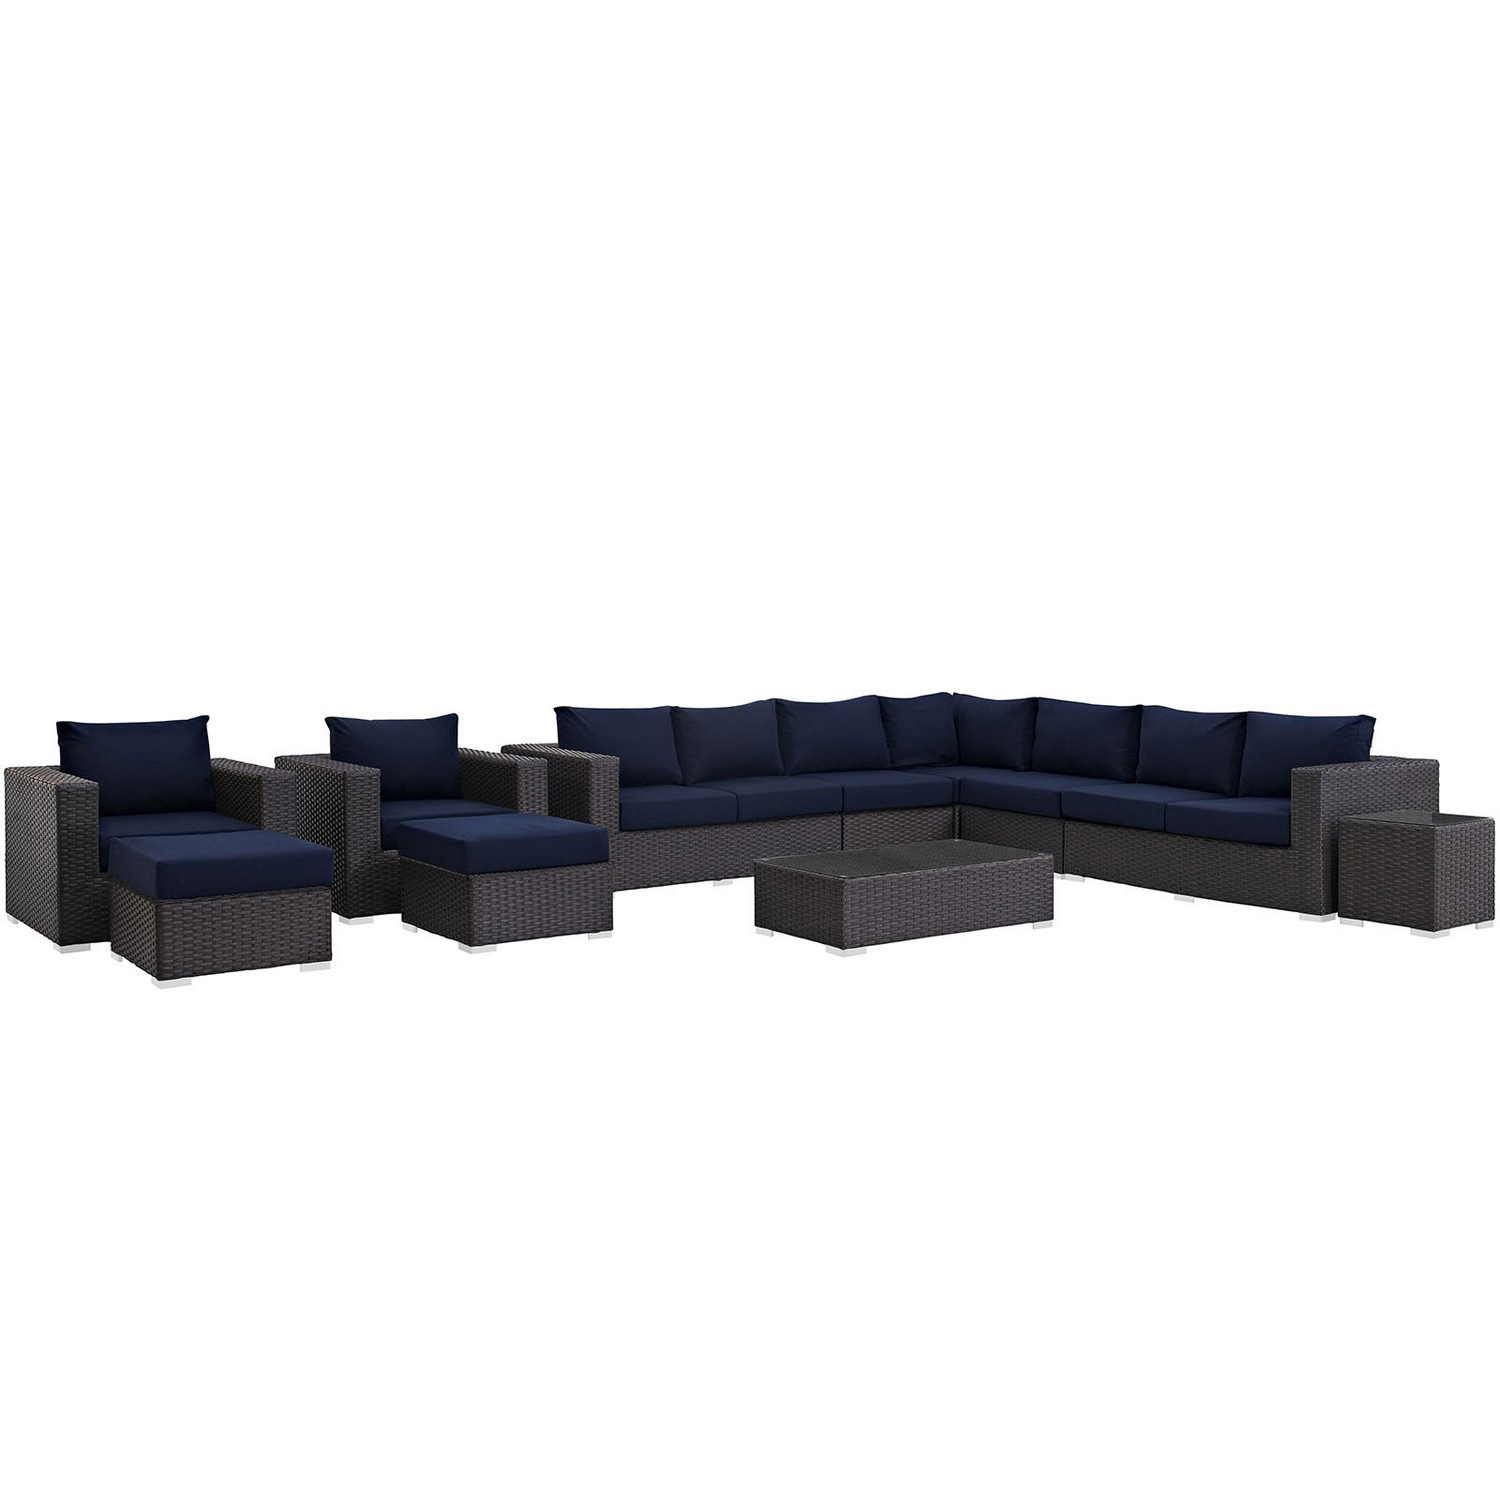 Modway Sojourn 11 Piece Outdoor Patio Sunbrella Sectional Set - Canvas Navy